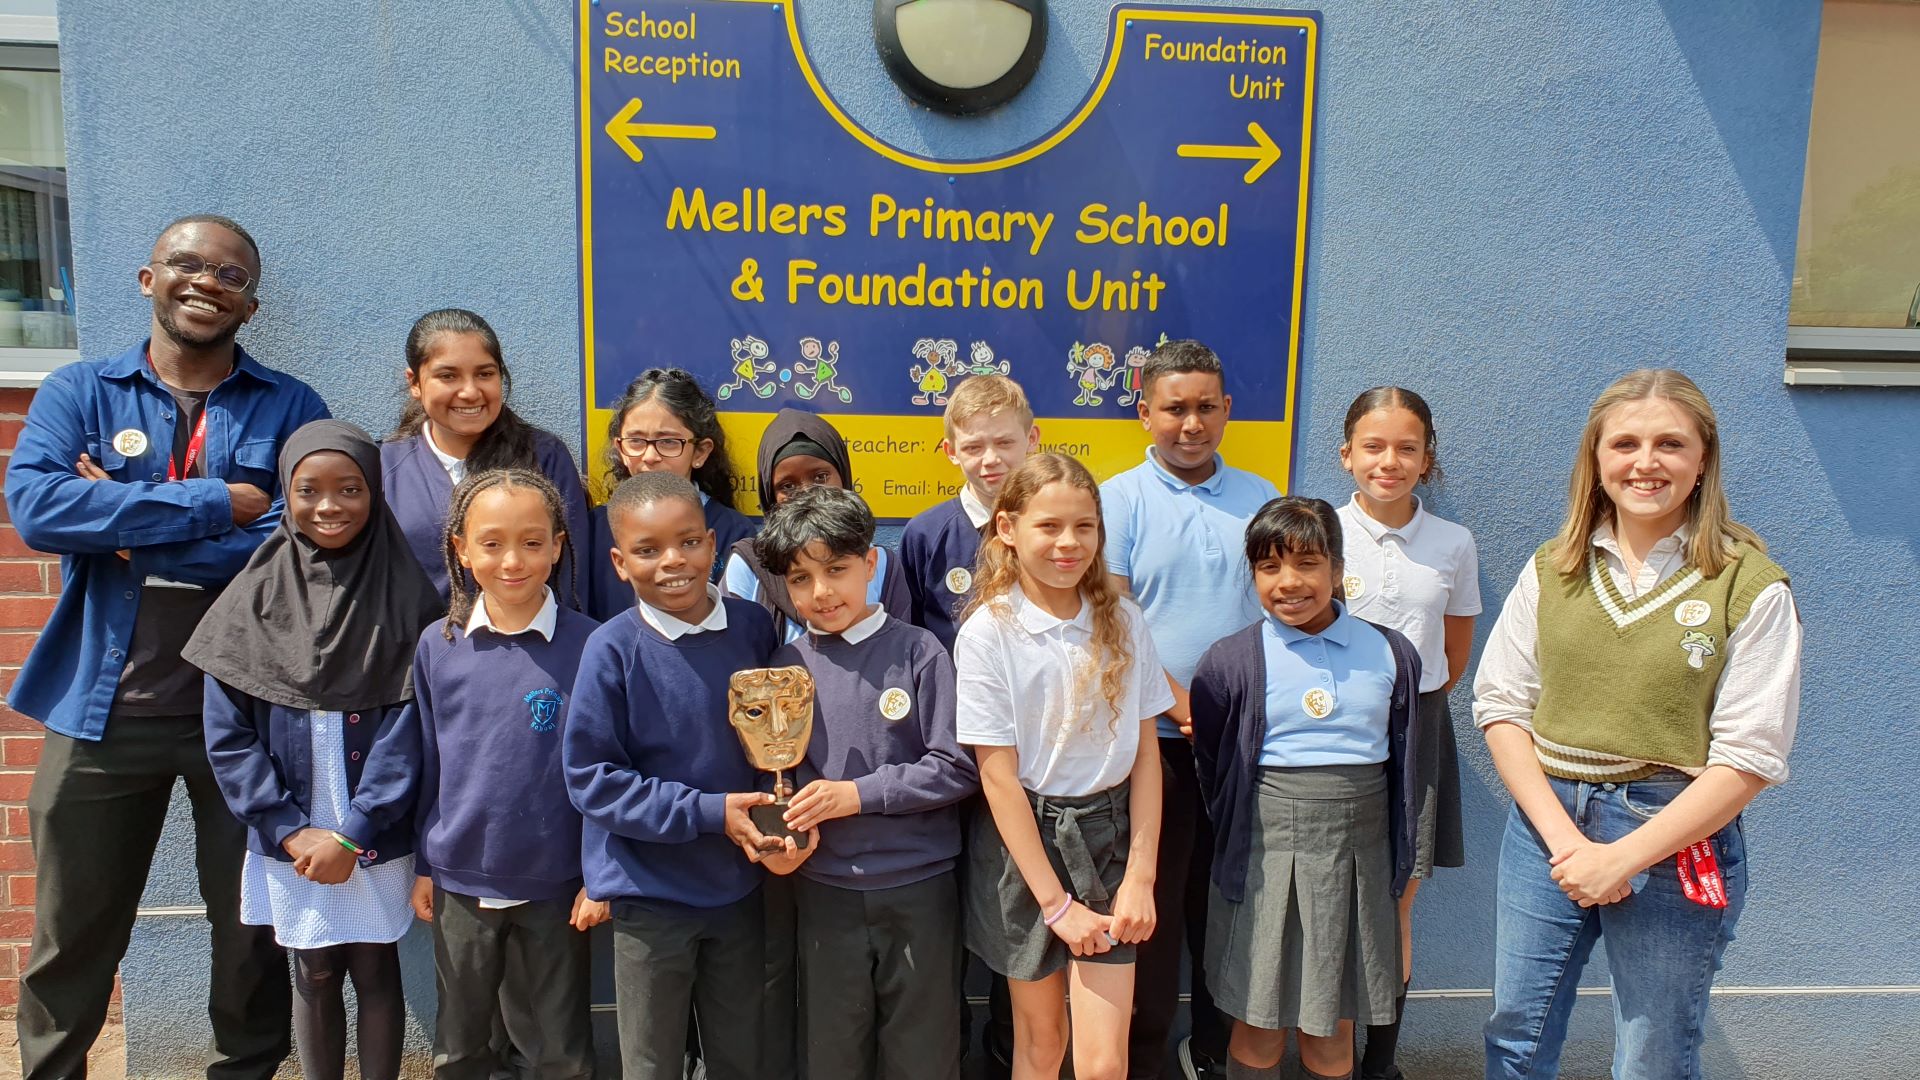 A group of Mellers Primary School students smiling and standing with BAFTA Roadshow presenters De-Graft Mensah (left) and Kia Pegg (right) in front of the school sign.